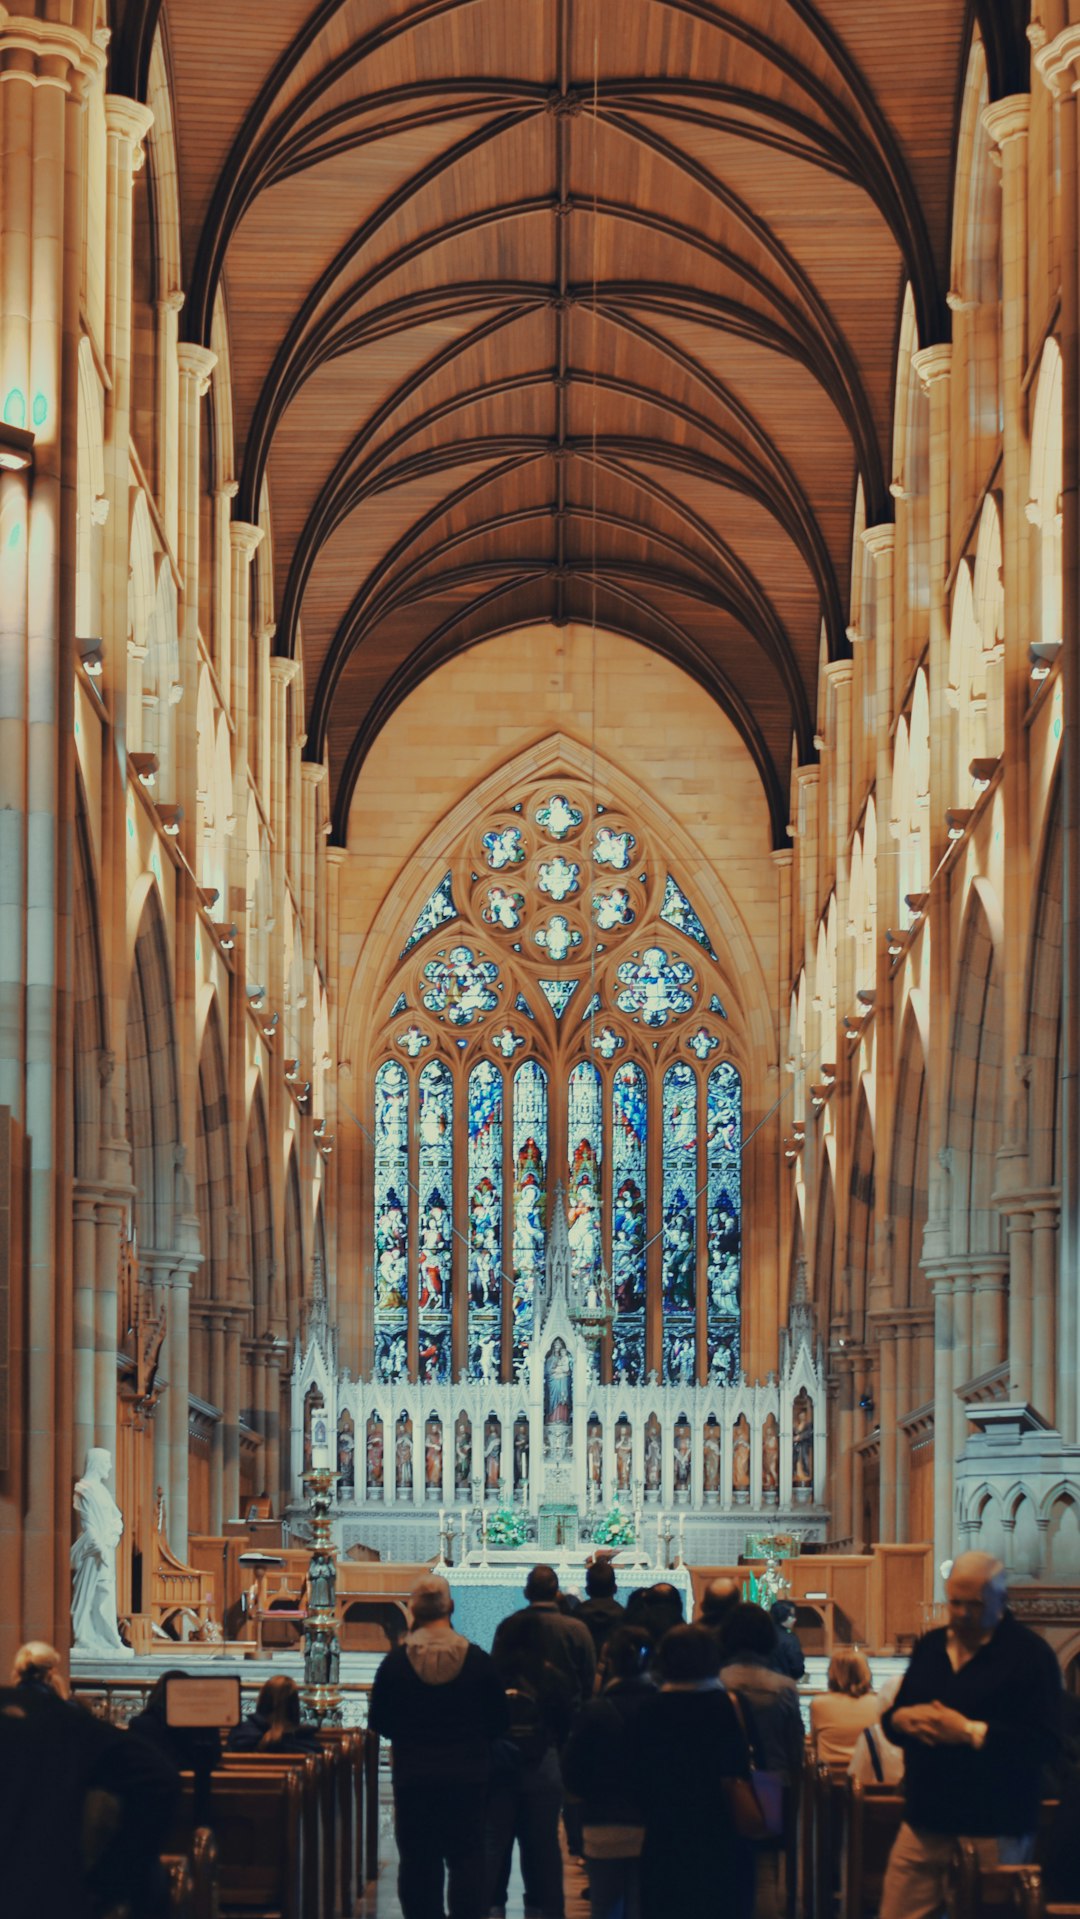 Travel Tips and Stories of St Mary's Cathedral in Australia